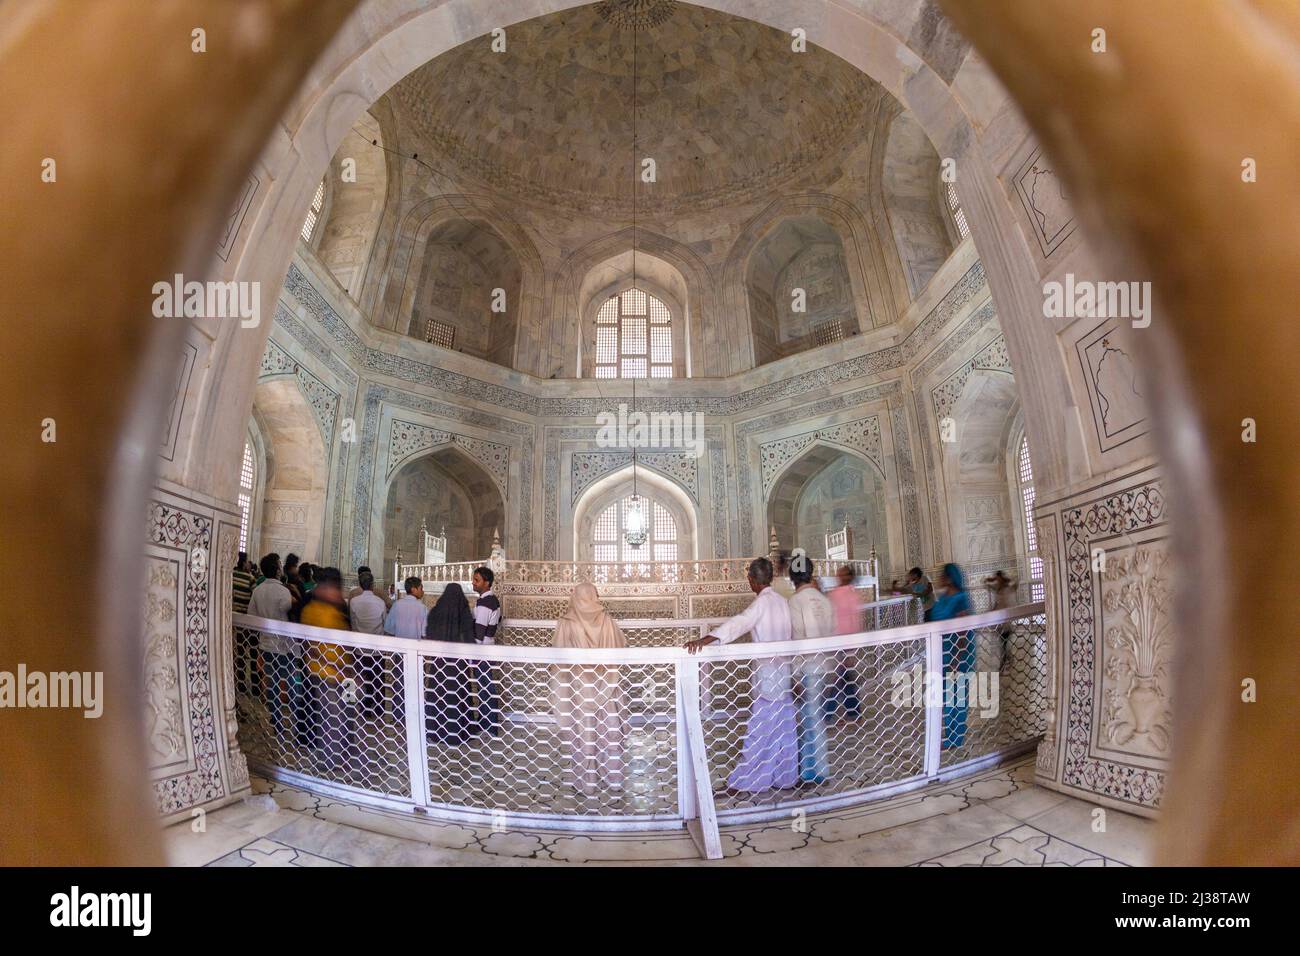 AGRA, INDIA - NOV 15, 2011: people visit the inside of the mausoleum Taj Mahal in India, the worlds famous grave. Stock Photo